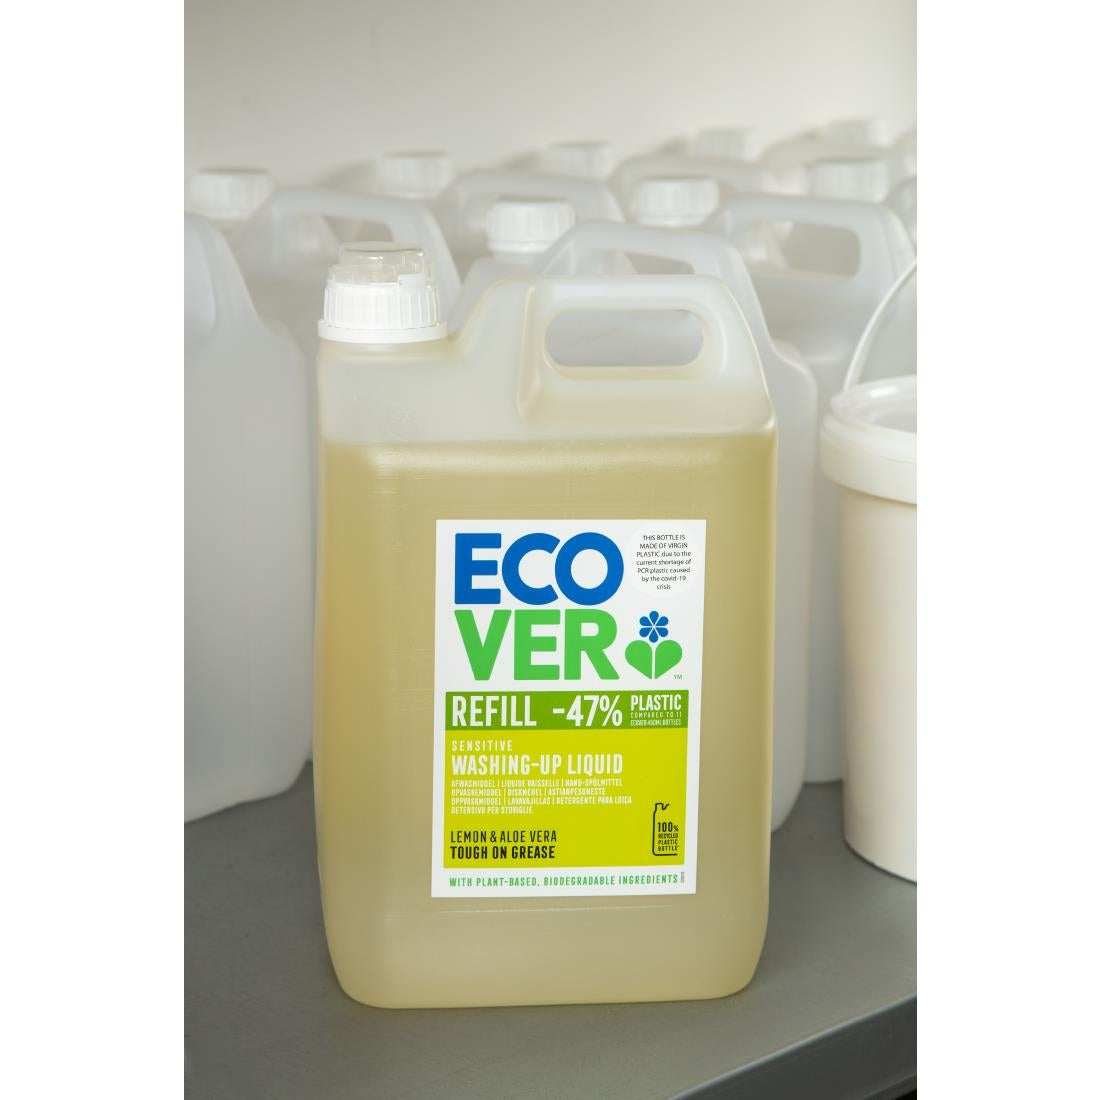 GG203 Ecover Lemon and Aloe Vera Washing Up Liquid Concentrate 5Ltr JD Catering Equipment Solutions Ltd